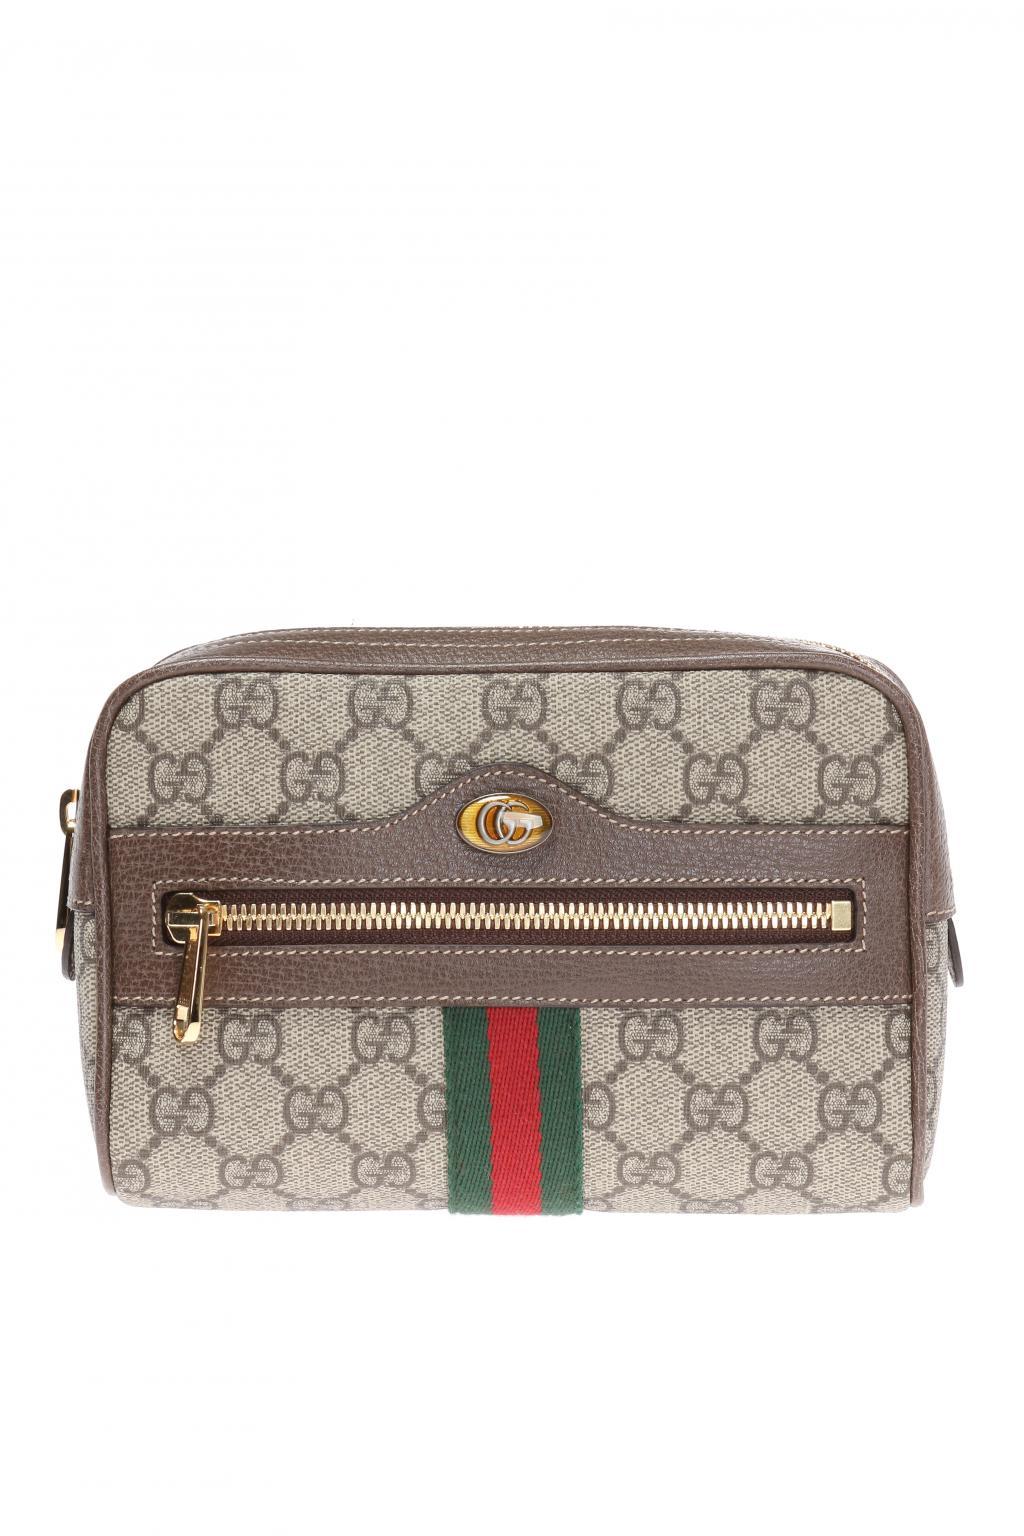 Gucci Ophidia GG Supreme Small Belt Bag Bag in Brown | Lyst